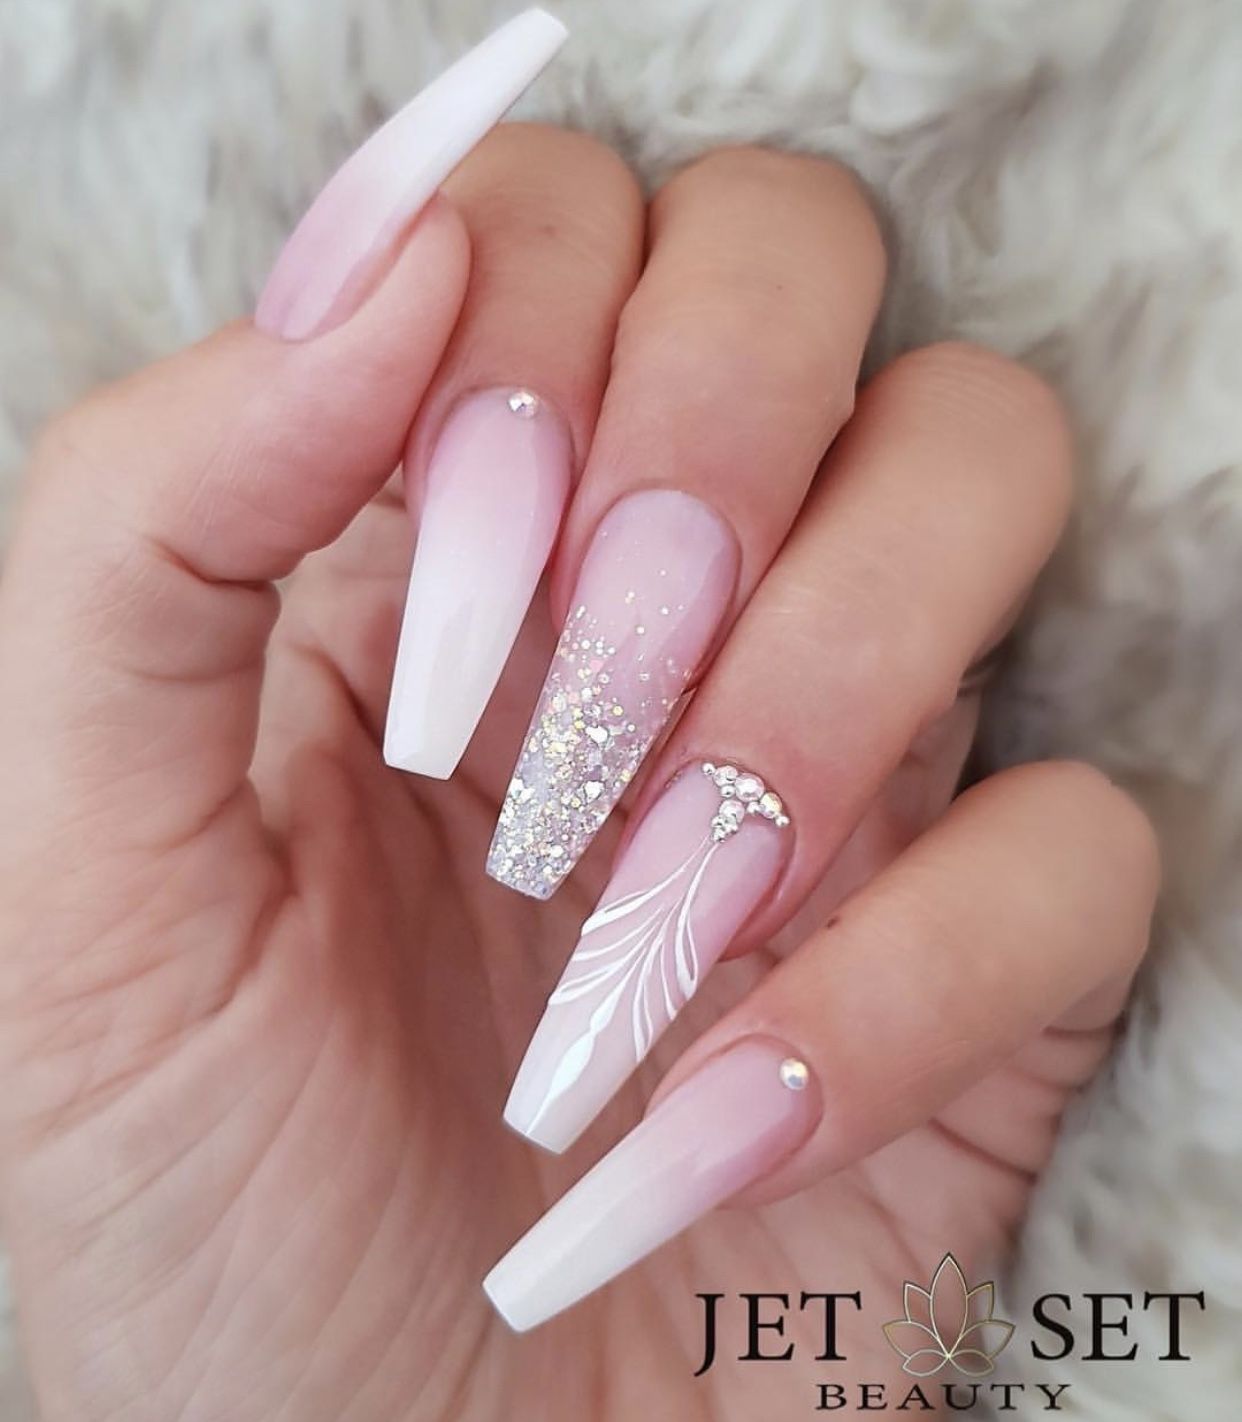 Pin By Angelina On Wedding In 2020 Bride Nails Pink Acrylic Nails Cute Acrylic Nails